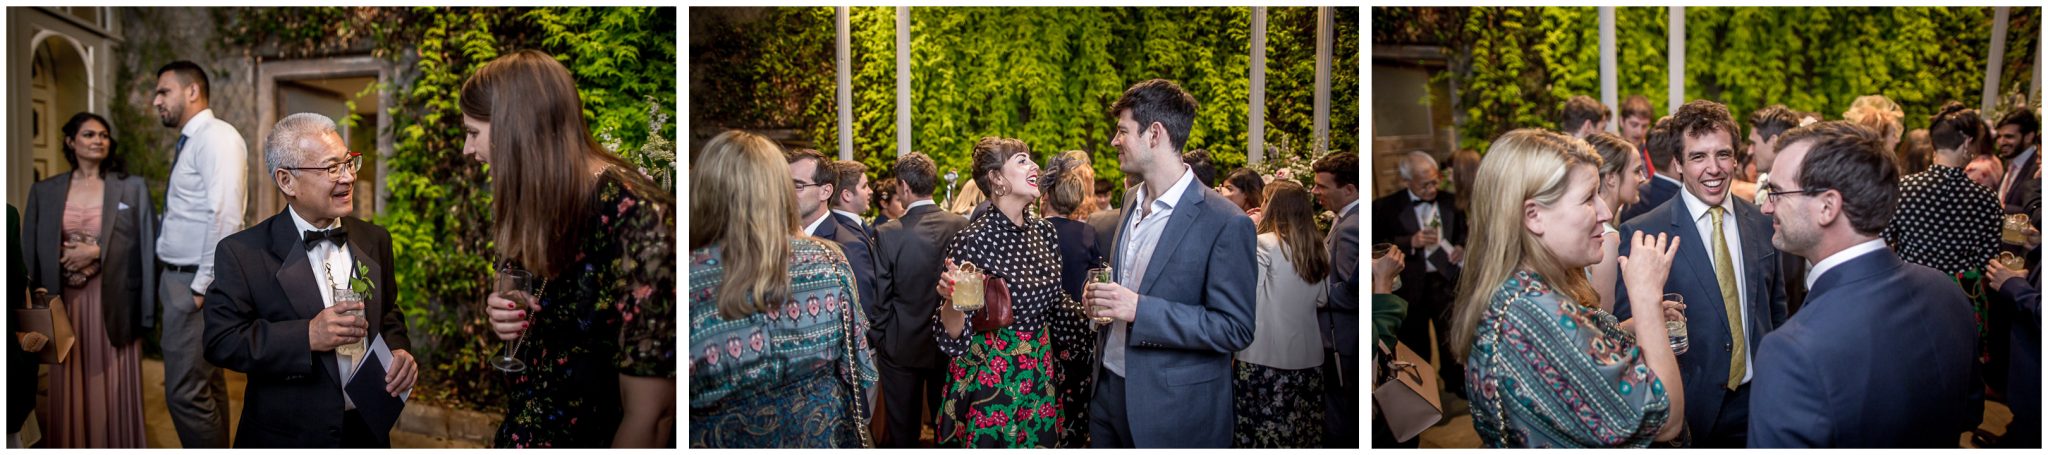 Candid photos of guests in conservatory during evening wedding reception